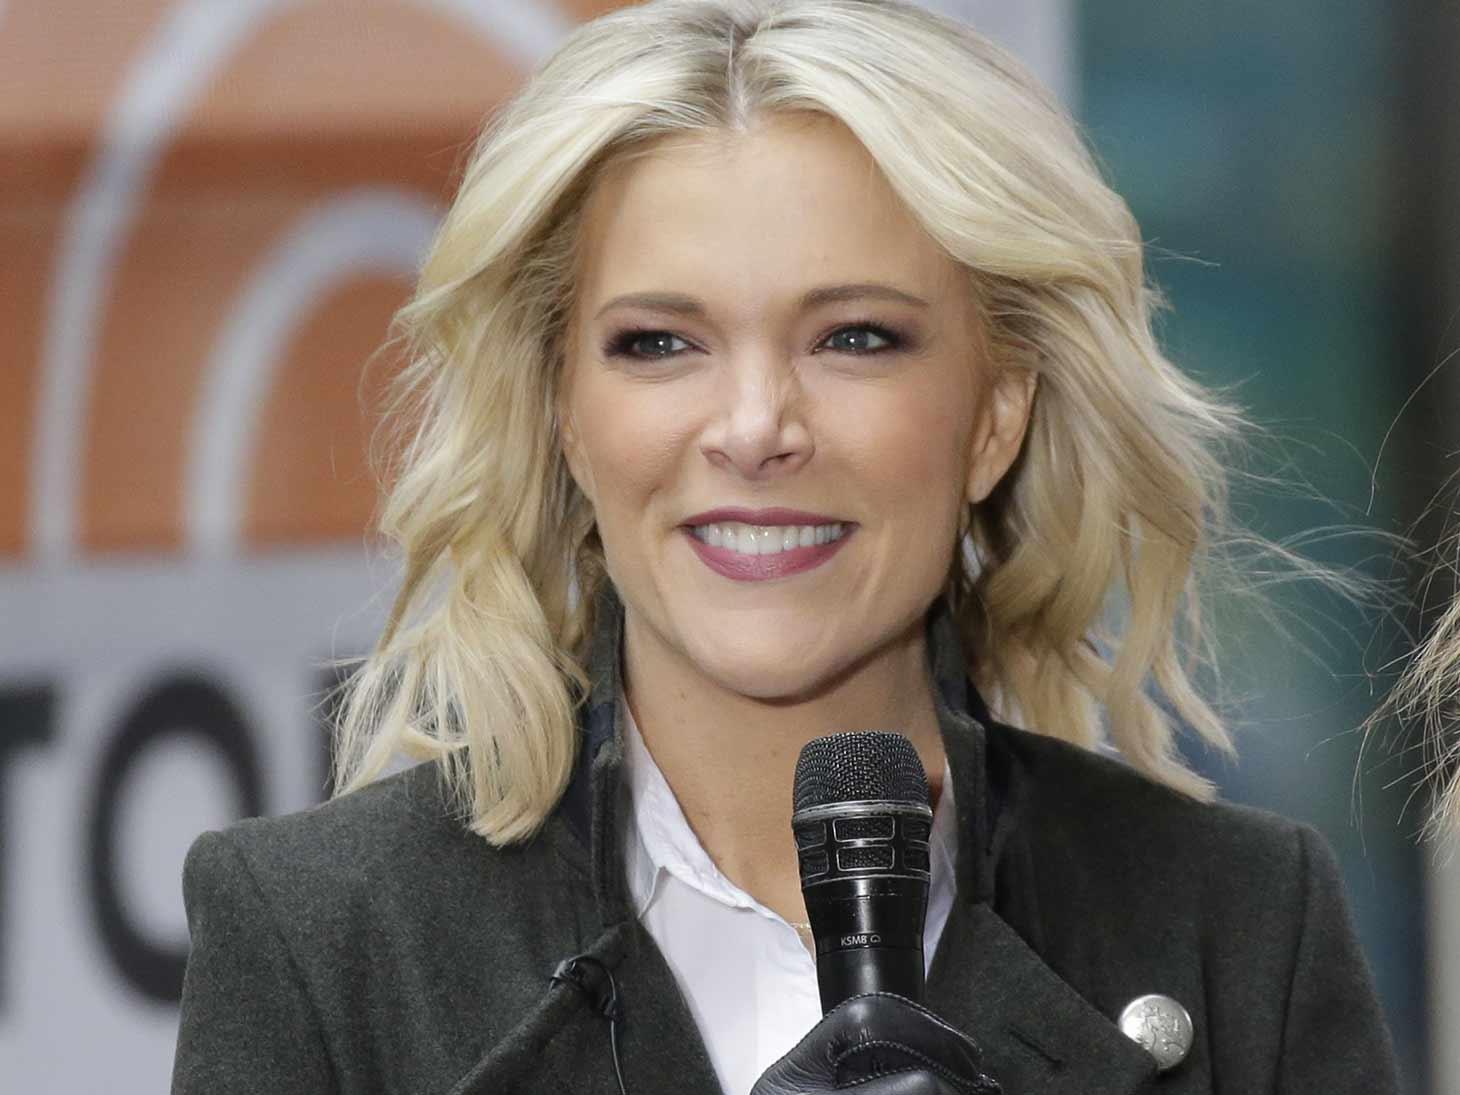 Megyn Kelly Settlement Deal: NBC Wants to Pay Her Over Time, She Wants to Work Immediately